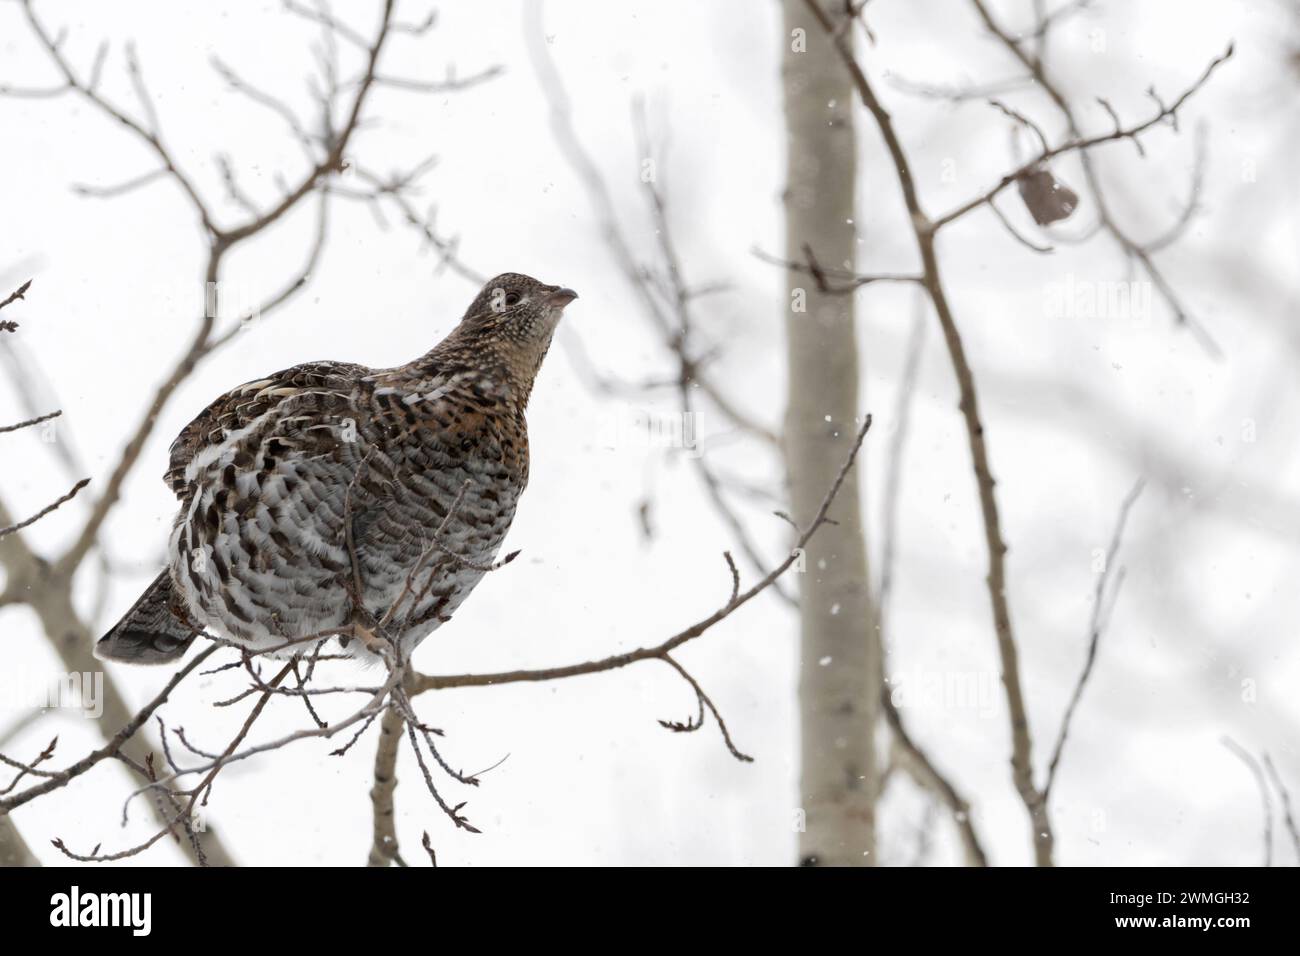 Ruffed Grouse ( Bonasa umbellus ) in winter, perched in a tree, sitting on a thin branch, searching for food, during light snowfall, Wyoming, USA. Stock Photo